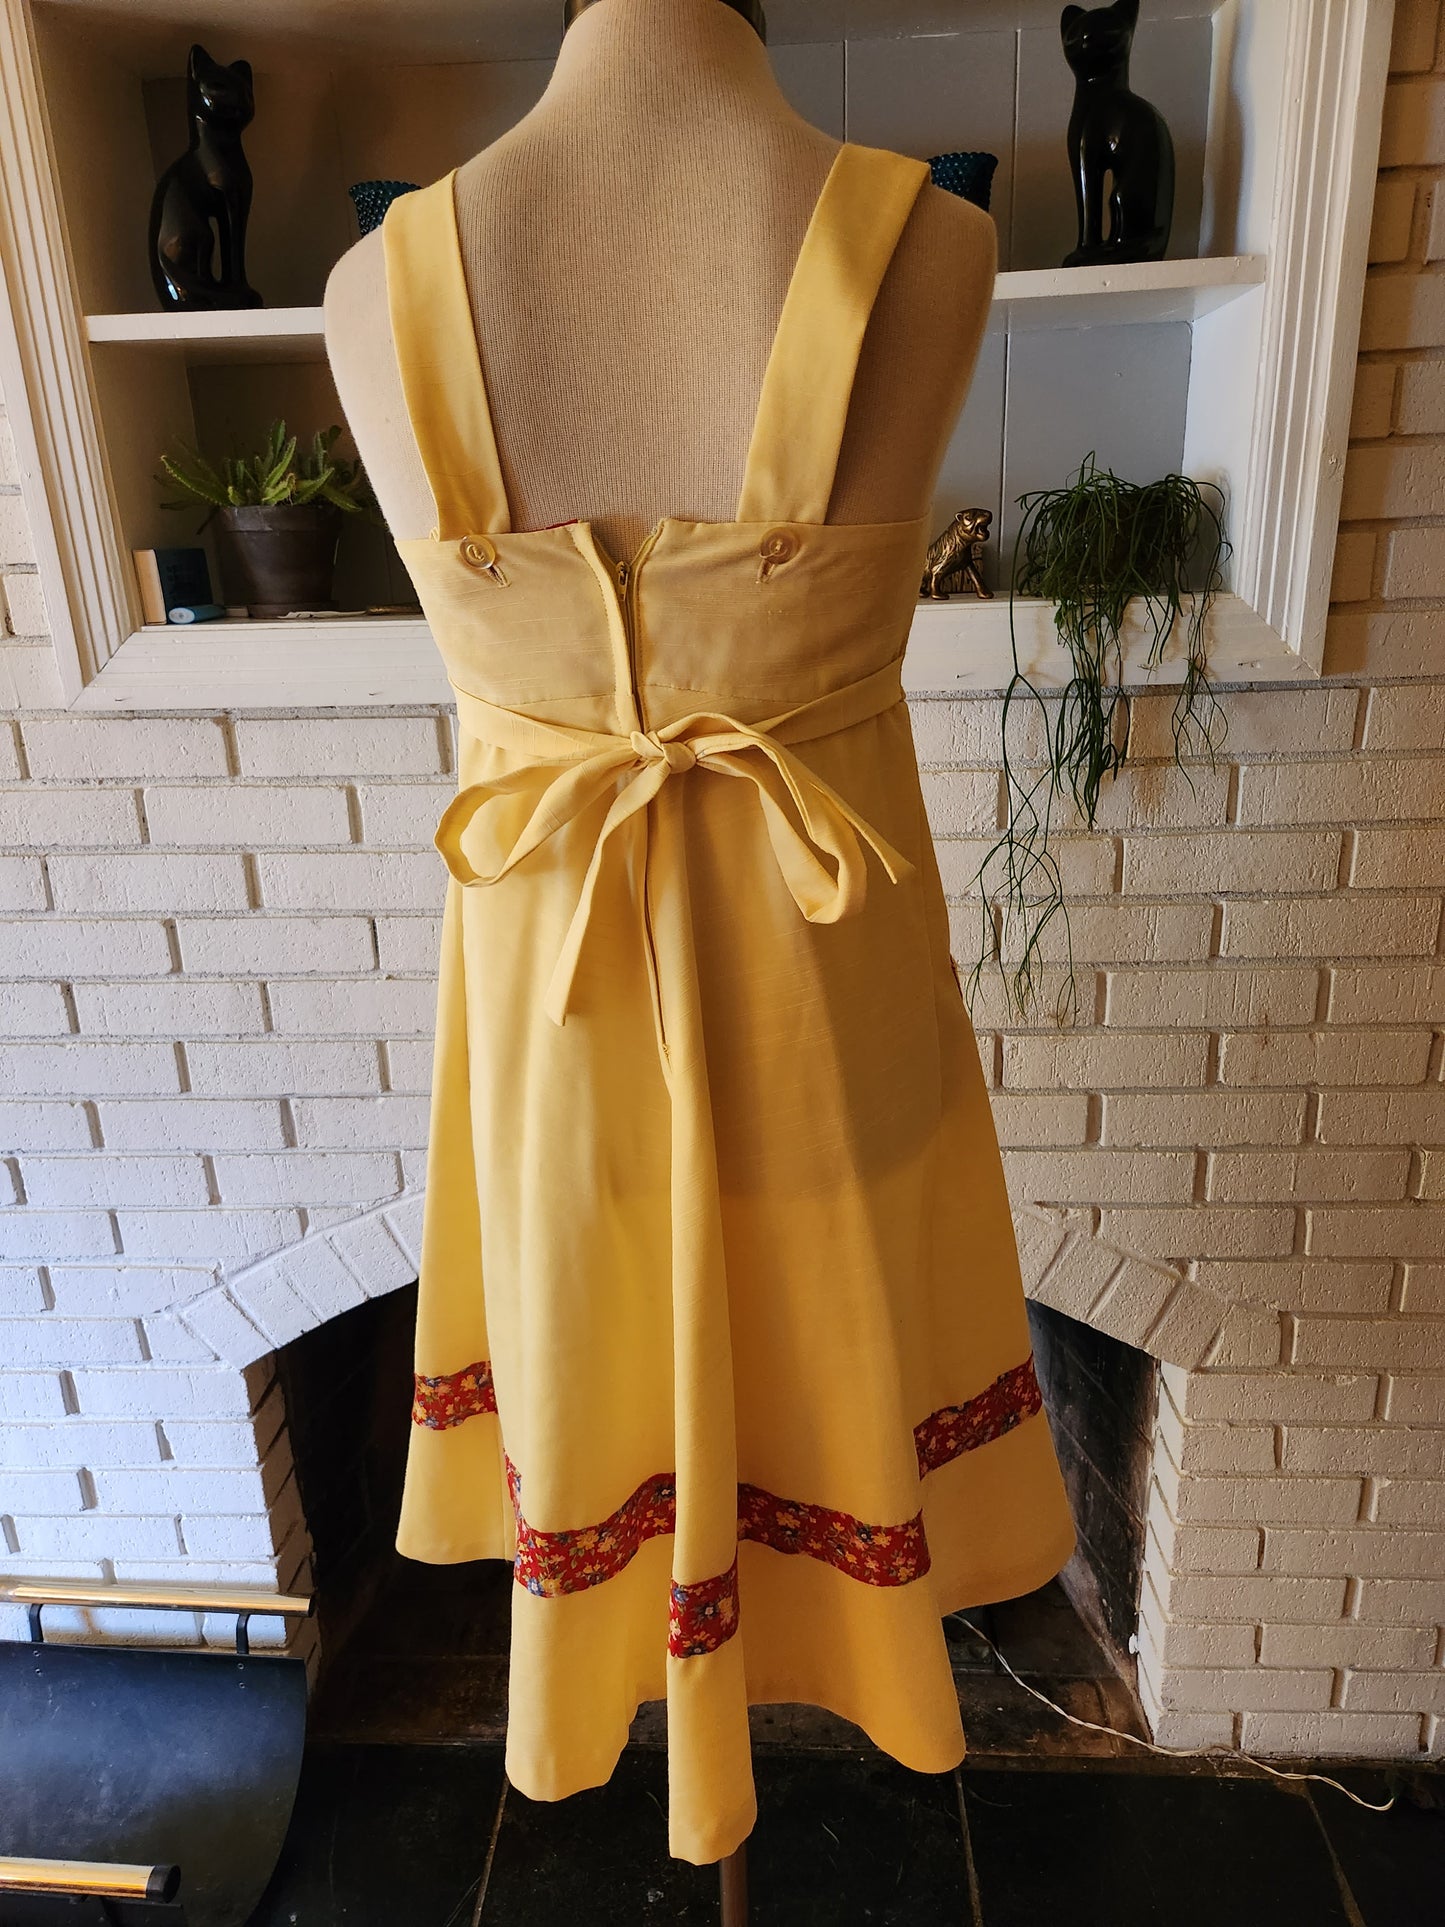 Vintage Sleeveless Yellow Dress with Floral Accents